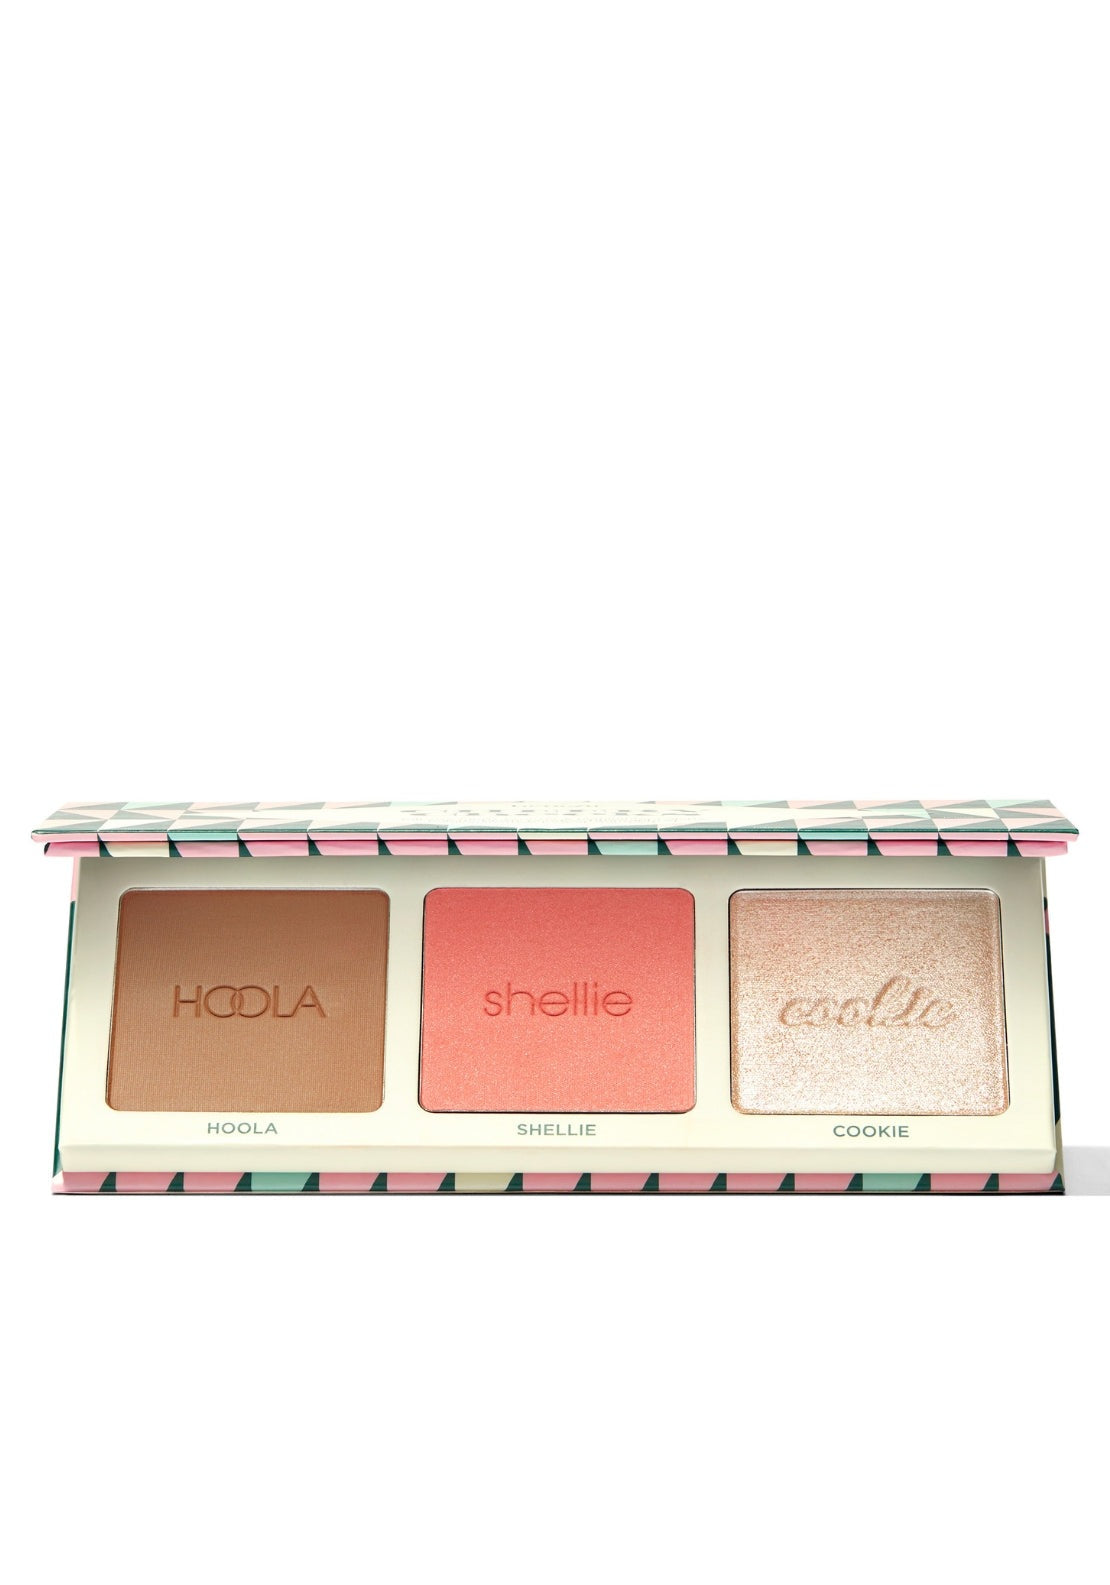 Cheery Cheeks limited edition face palette